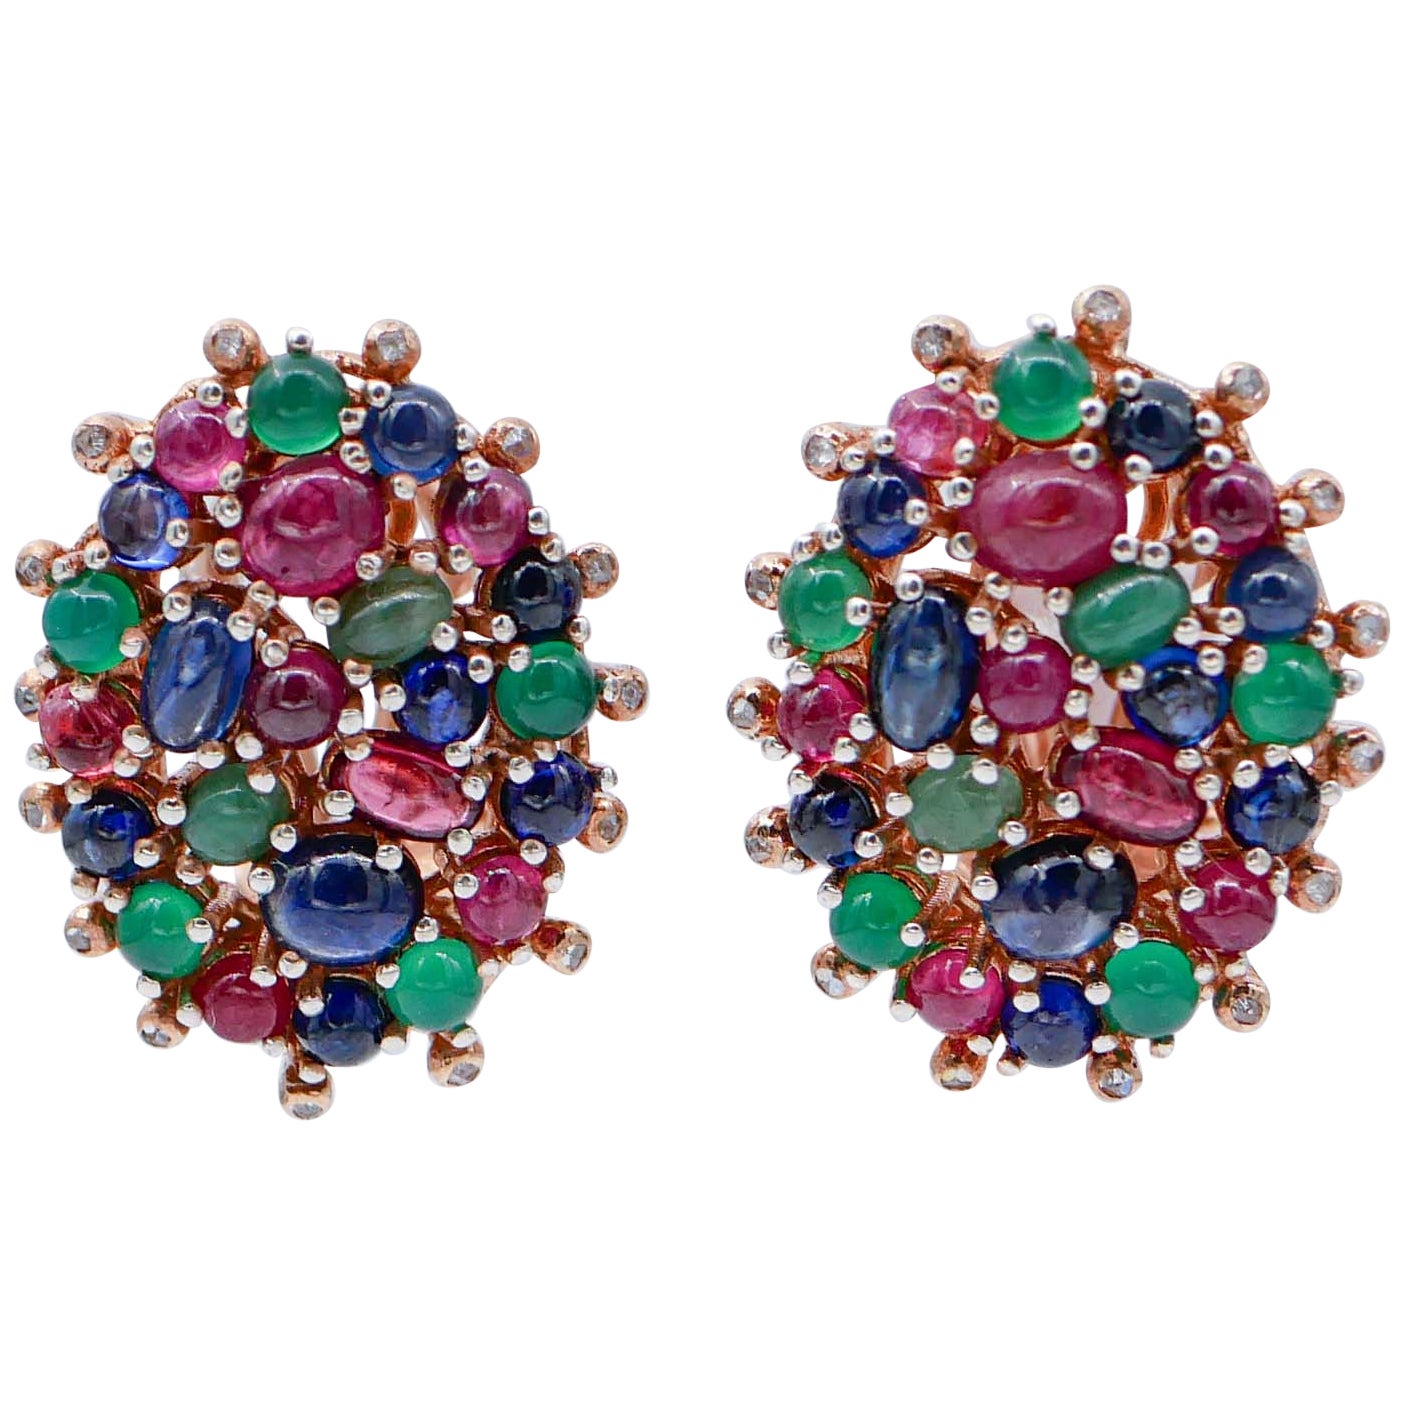 Rubies, Emeralds, Sapphires,  Agate, Diamonds, Rose Gold and Silver Earrings For Sale